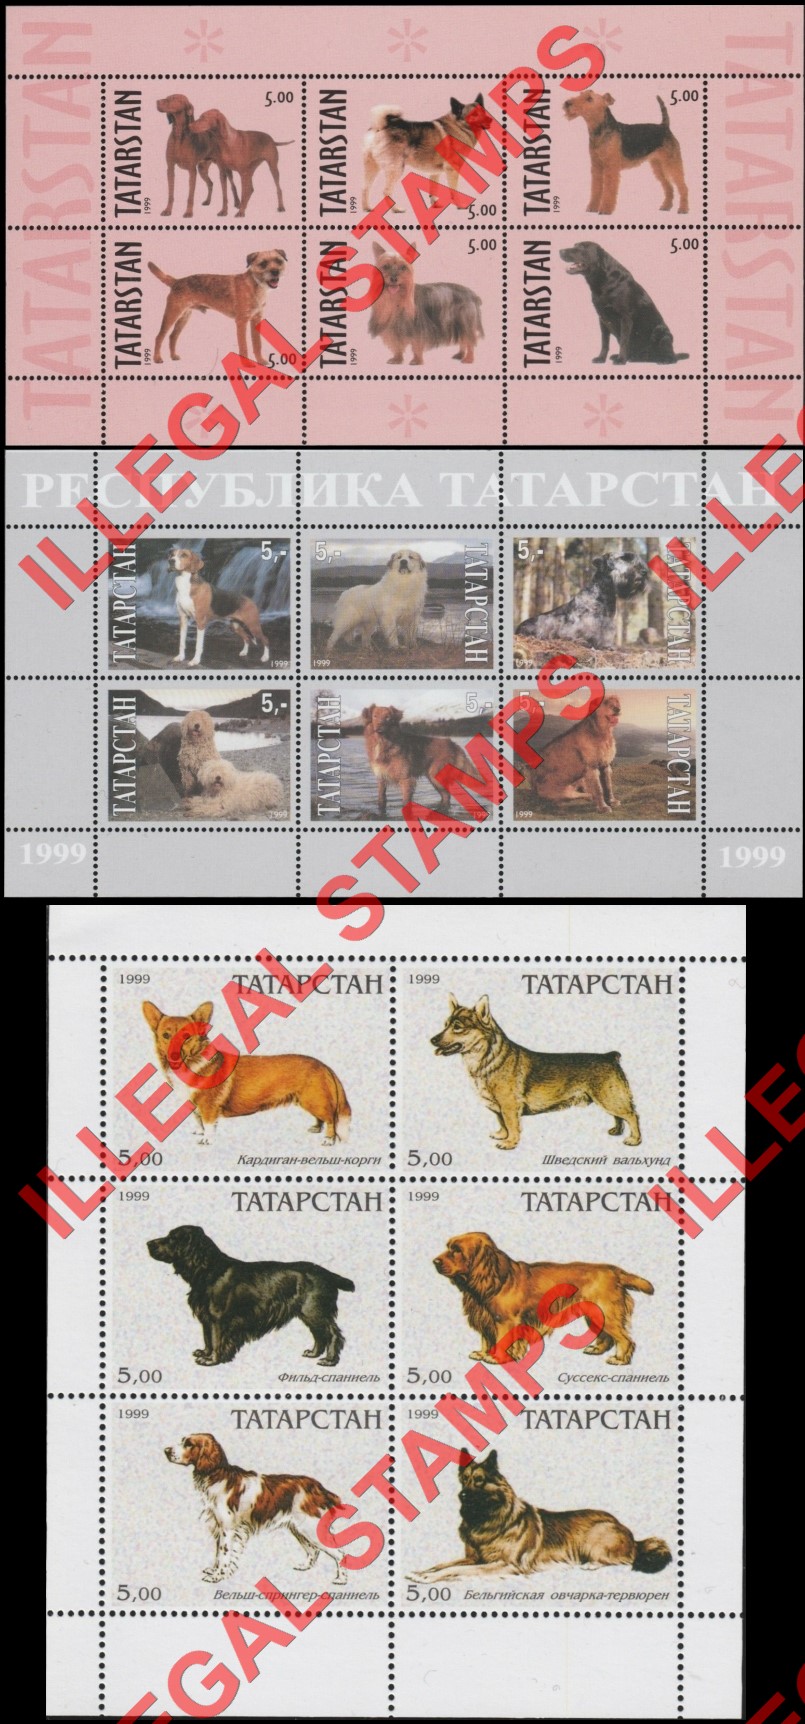 Republic of Tatarstan 1999 Counterfeit Illegal Stamps (Part 1)